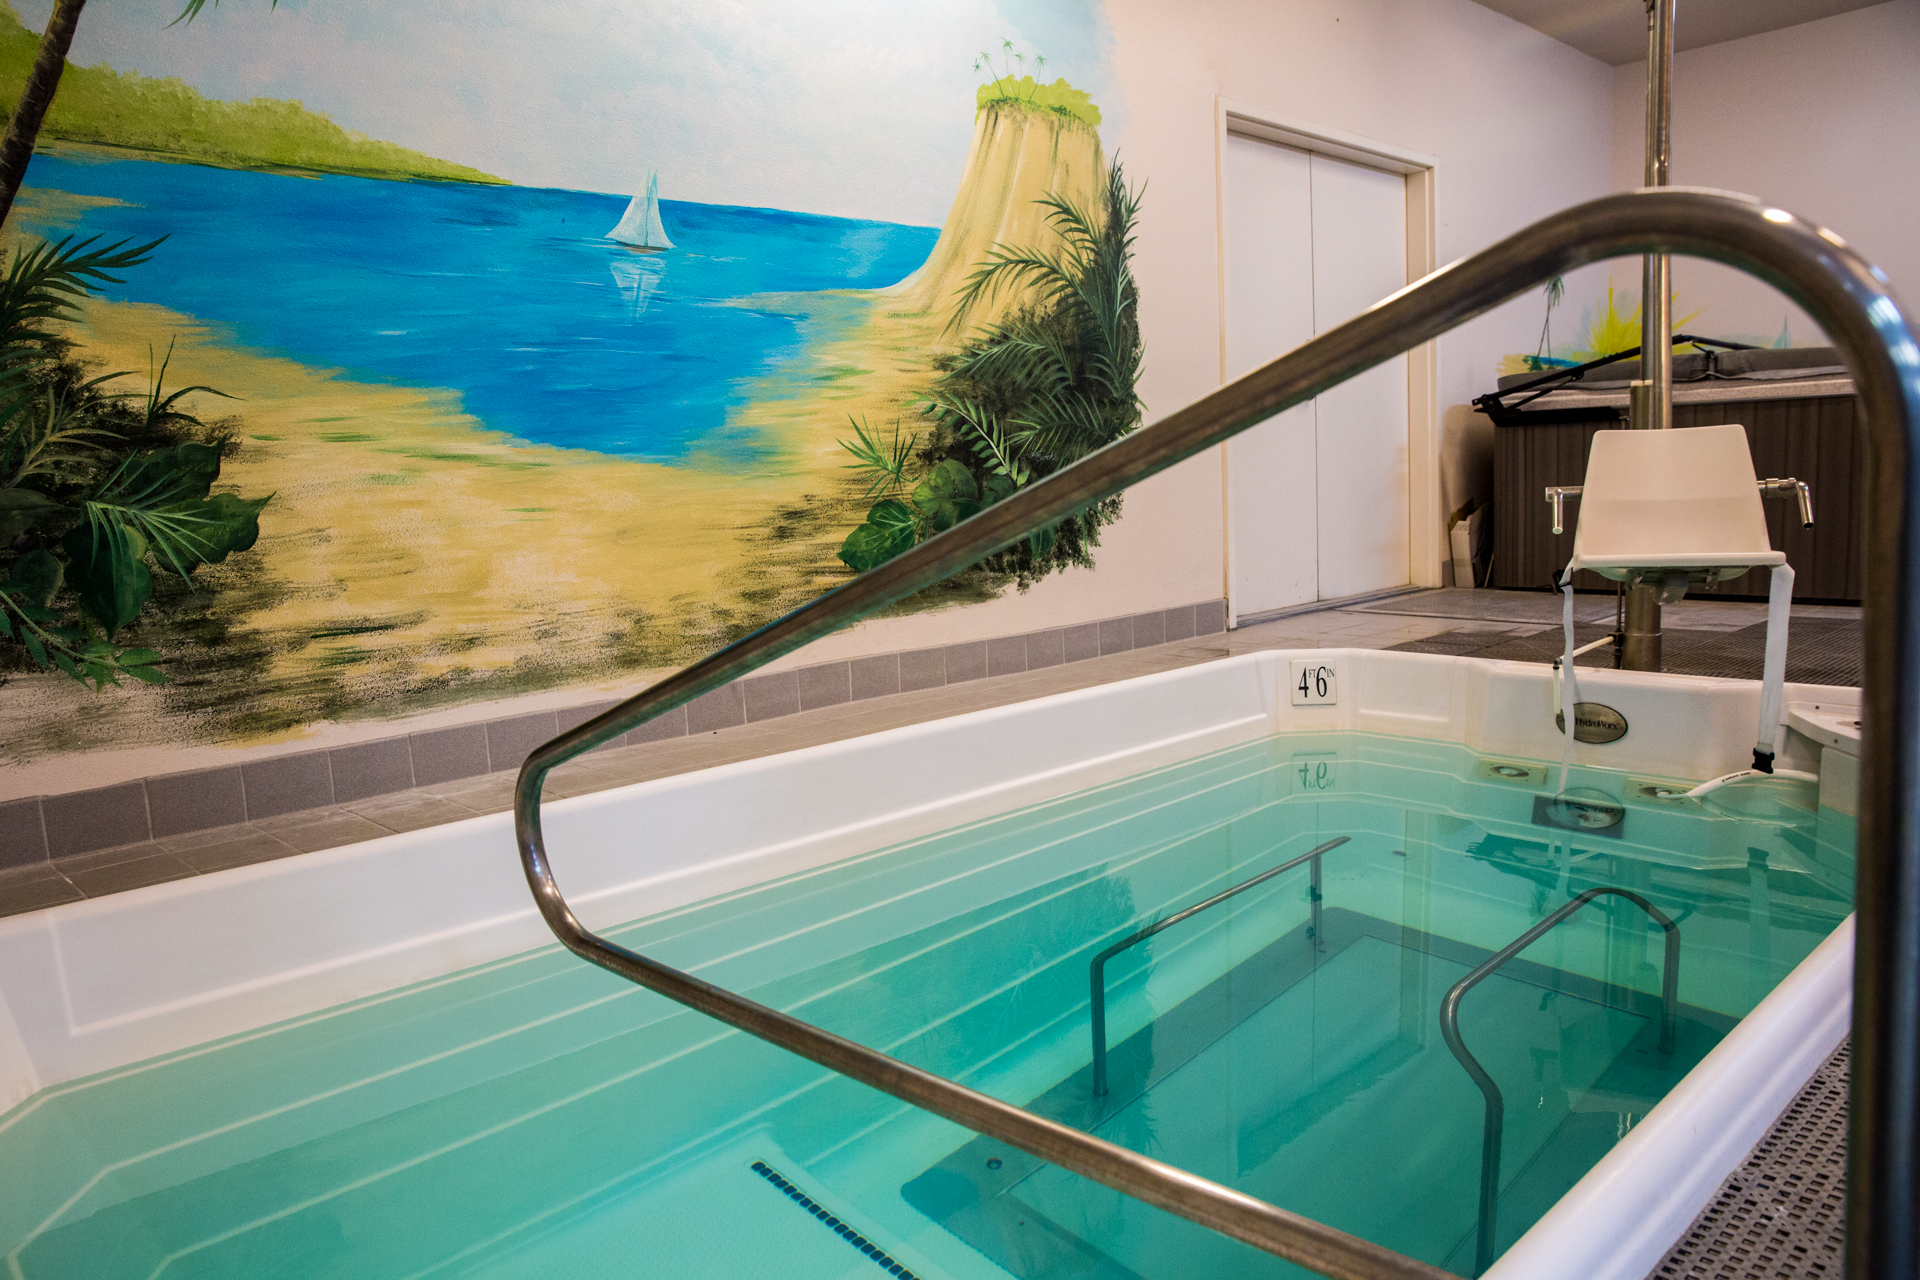 Physical therapy swimming pool for hydrotherapy.